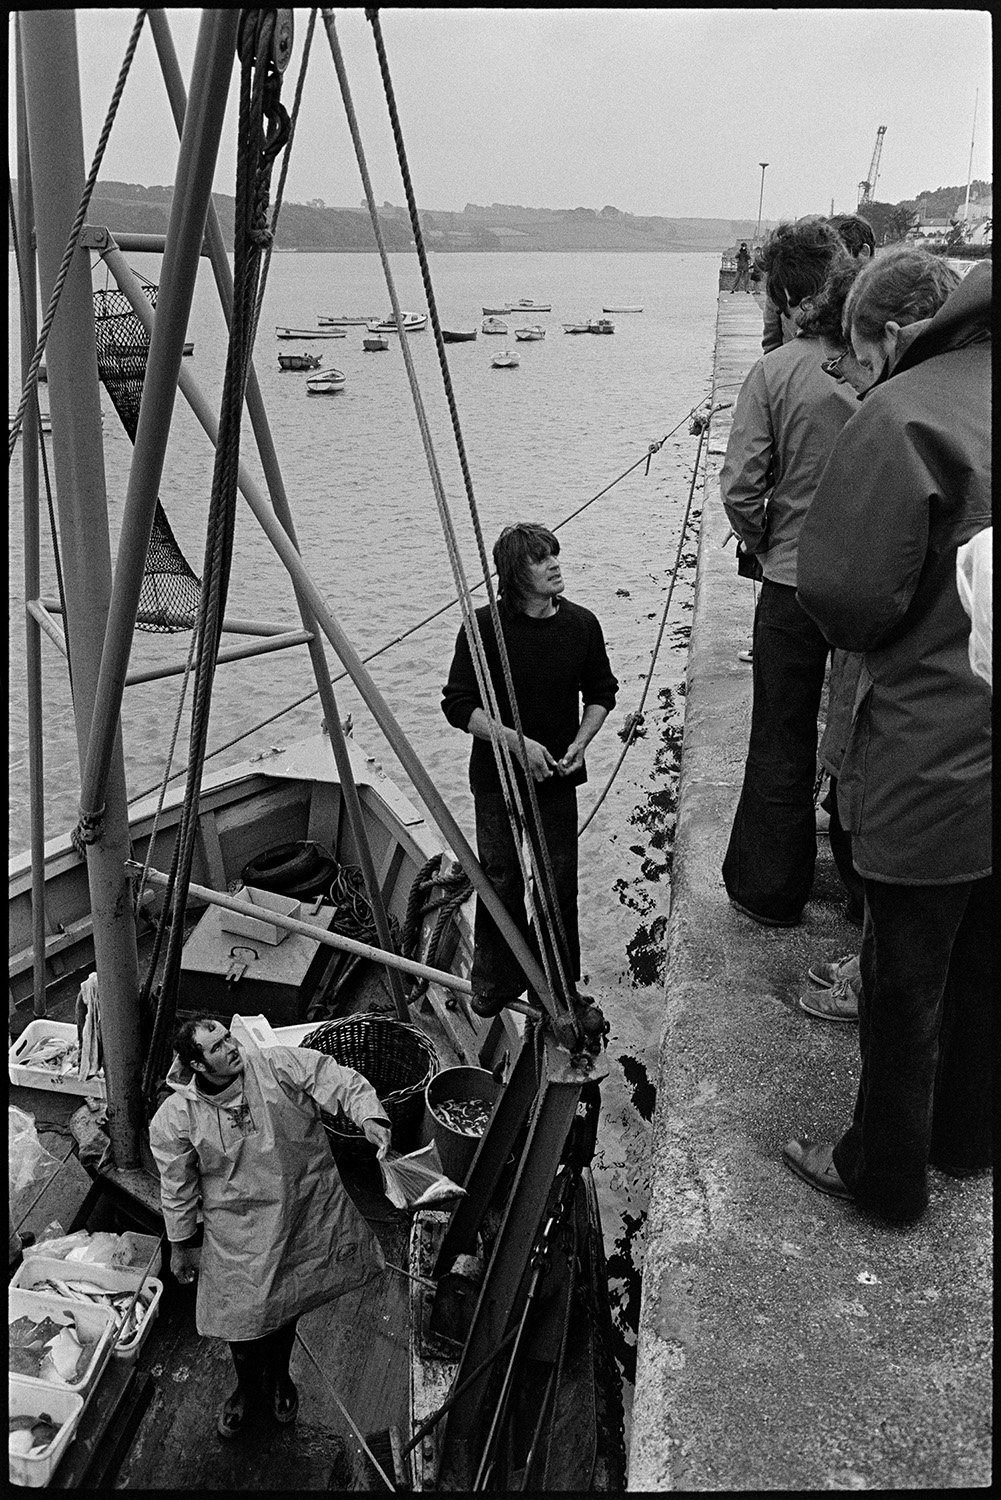 Fishermen selling fish from boat at quayside. 
[Two fishermen selling their catch of fish from their fishing boat to customers on the quayside at Appledore. Other boats can be seen in the estuary in the background.]